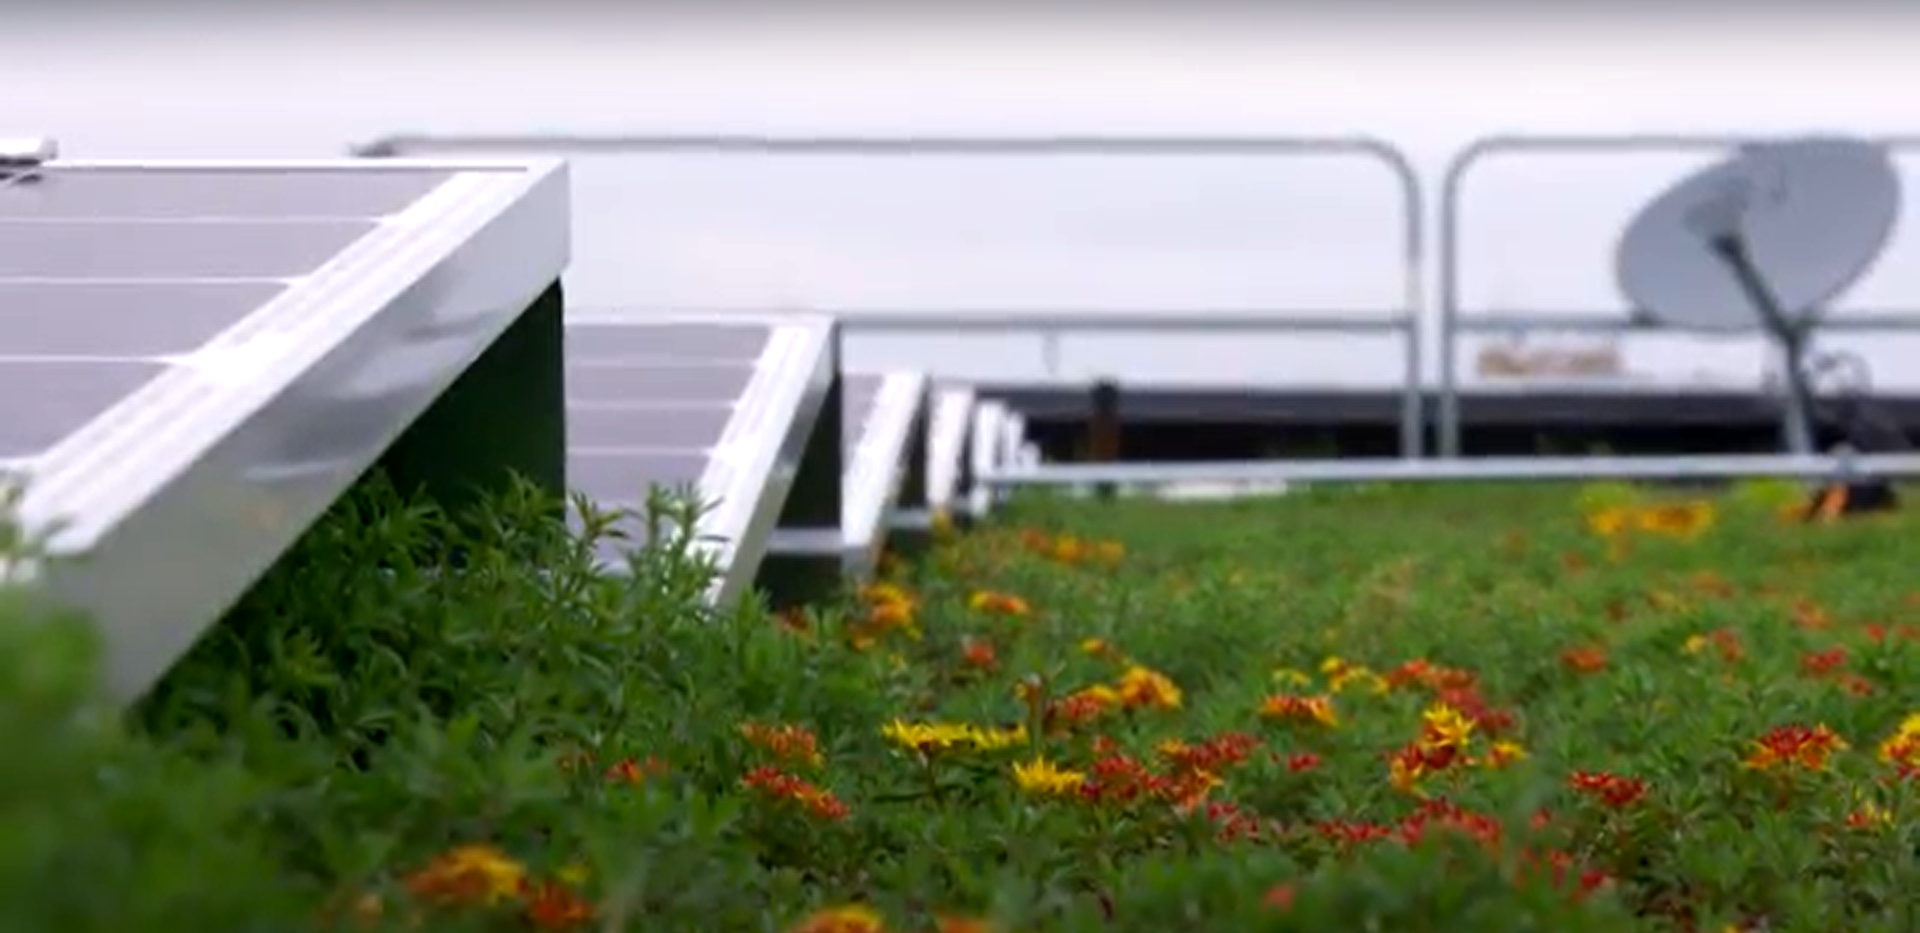 A ground view of greenery with flowers and solar panels angled in a row on the left. A satellite in on the far right with a guard rail behind.